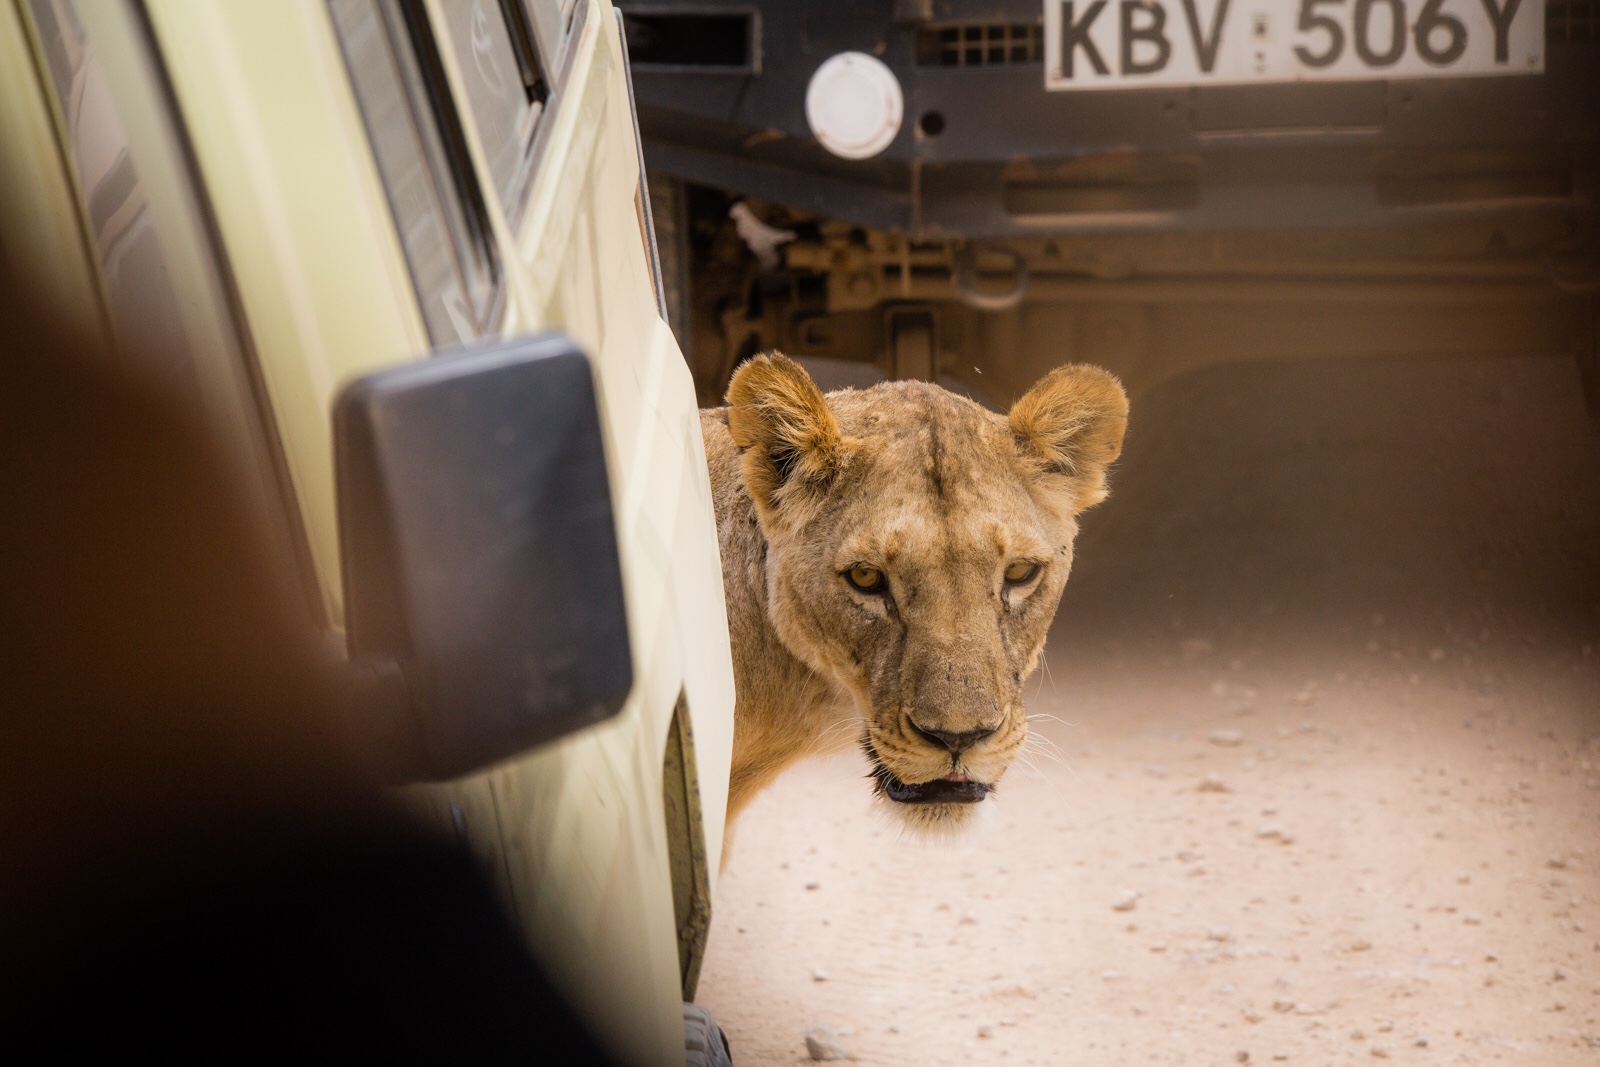 A female lion crossing the road in Amboseli, literally peeking out between all the parked vans.